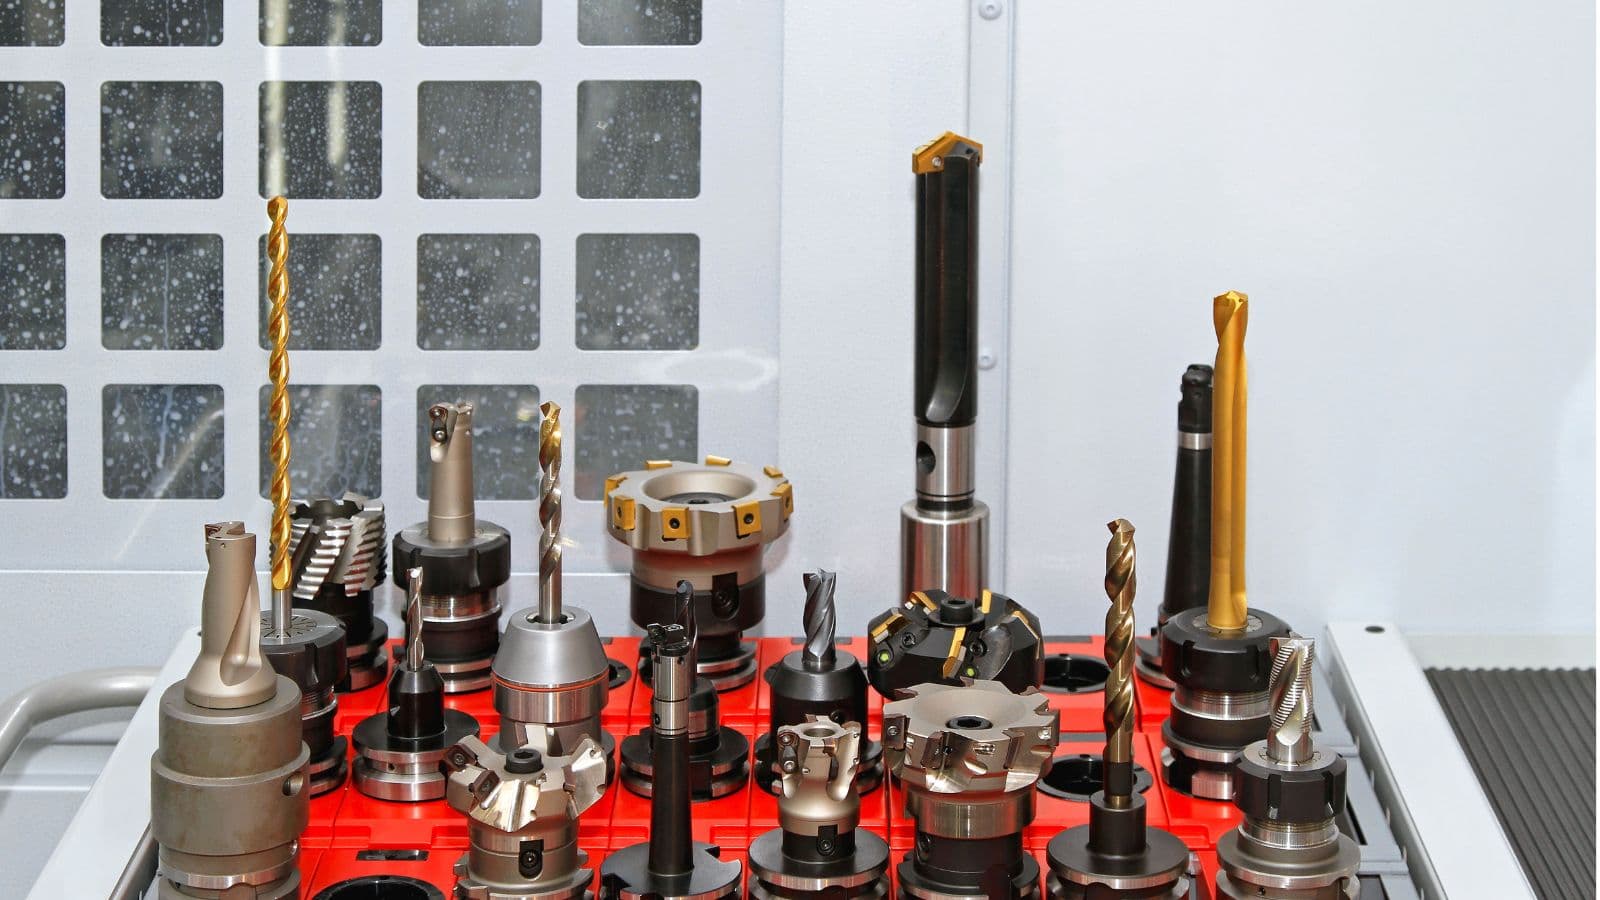 cnc tools and toolholders